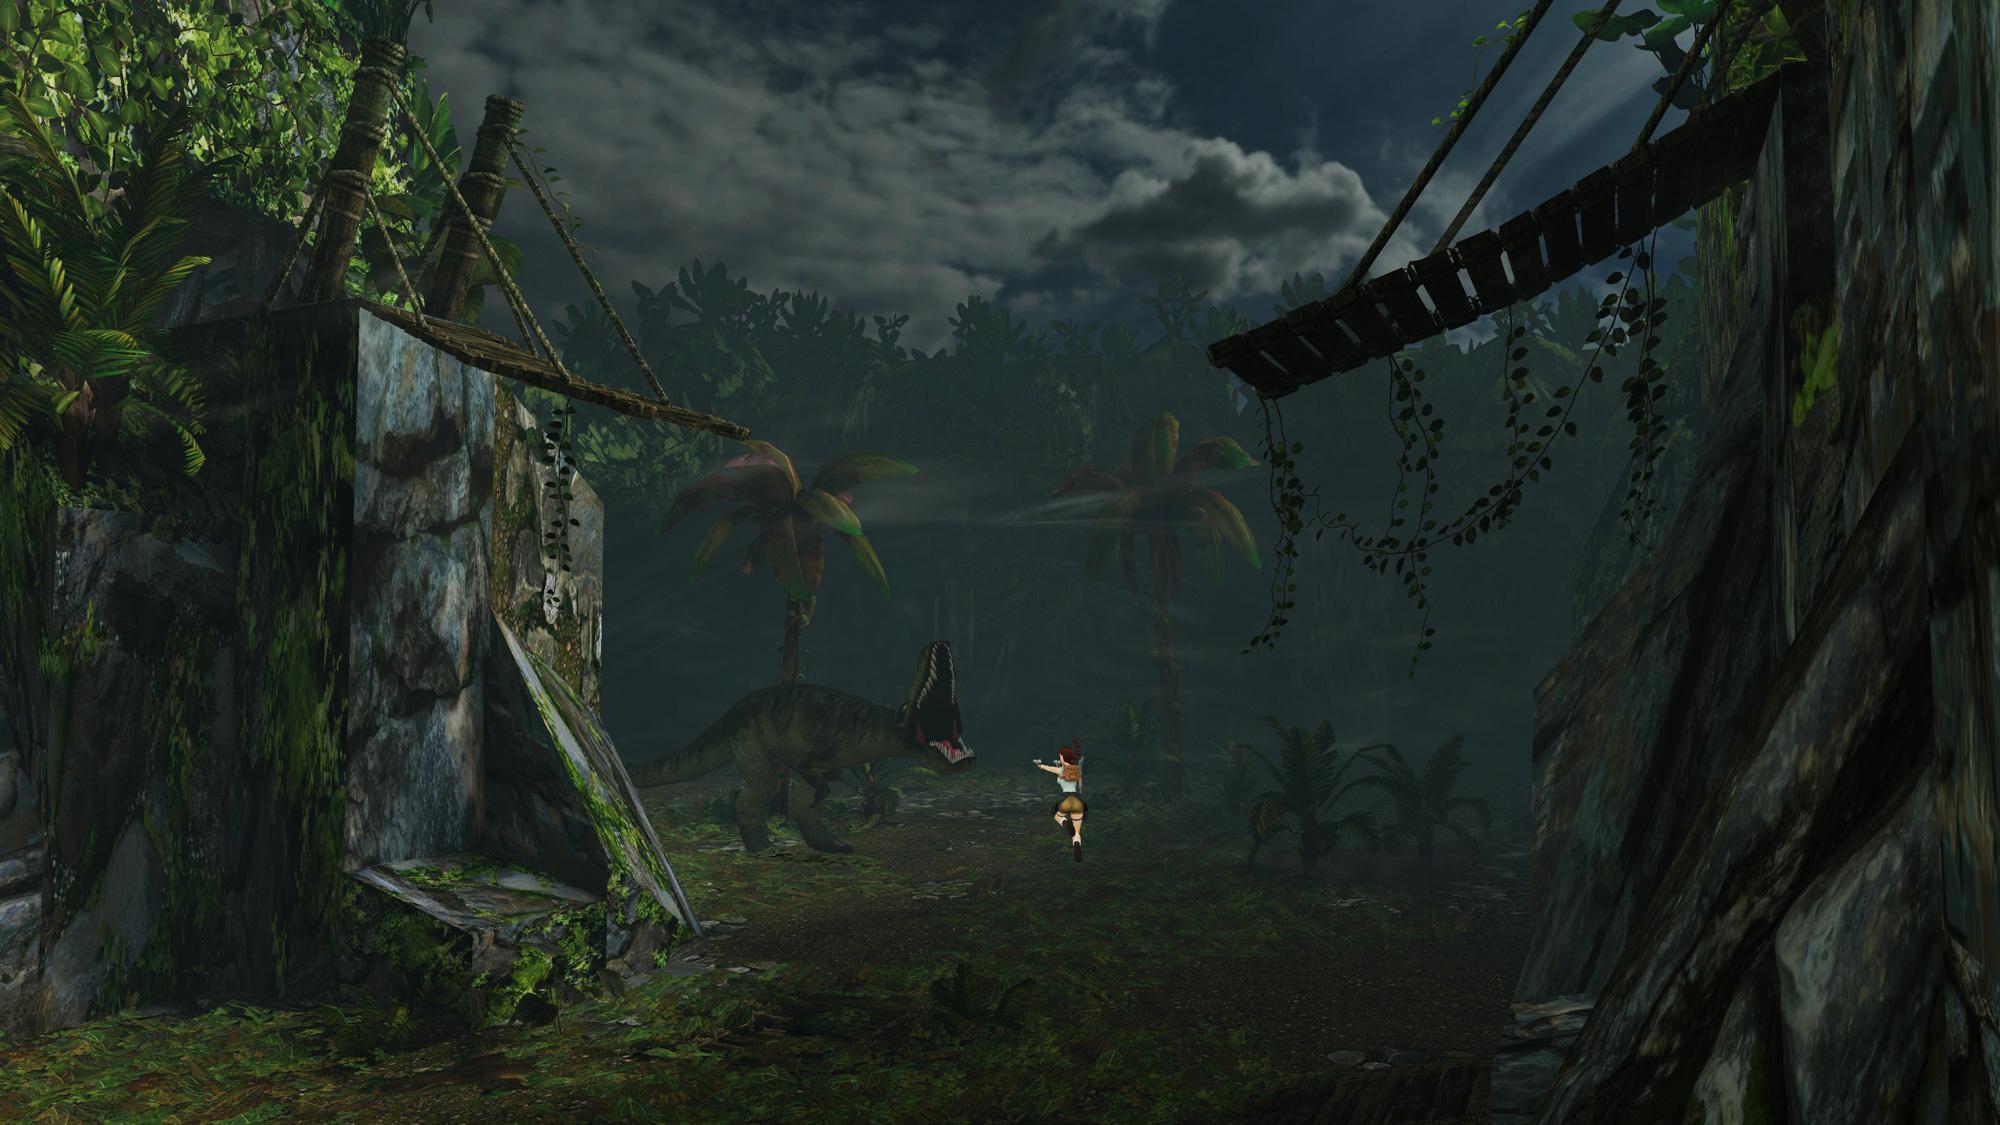 Lara fighting the T-Rex in the Lost Valley